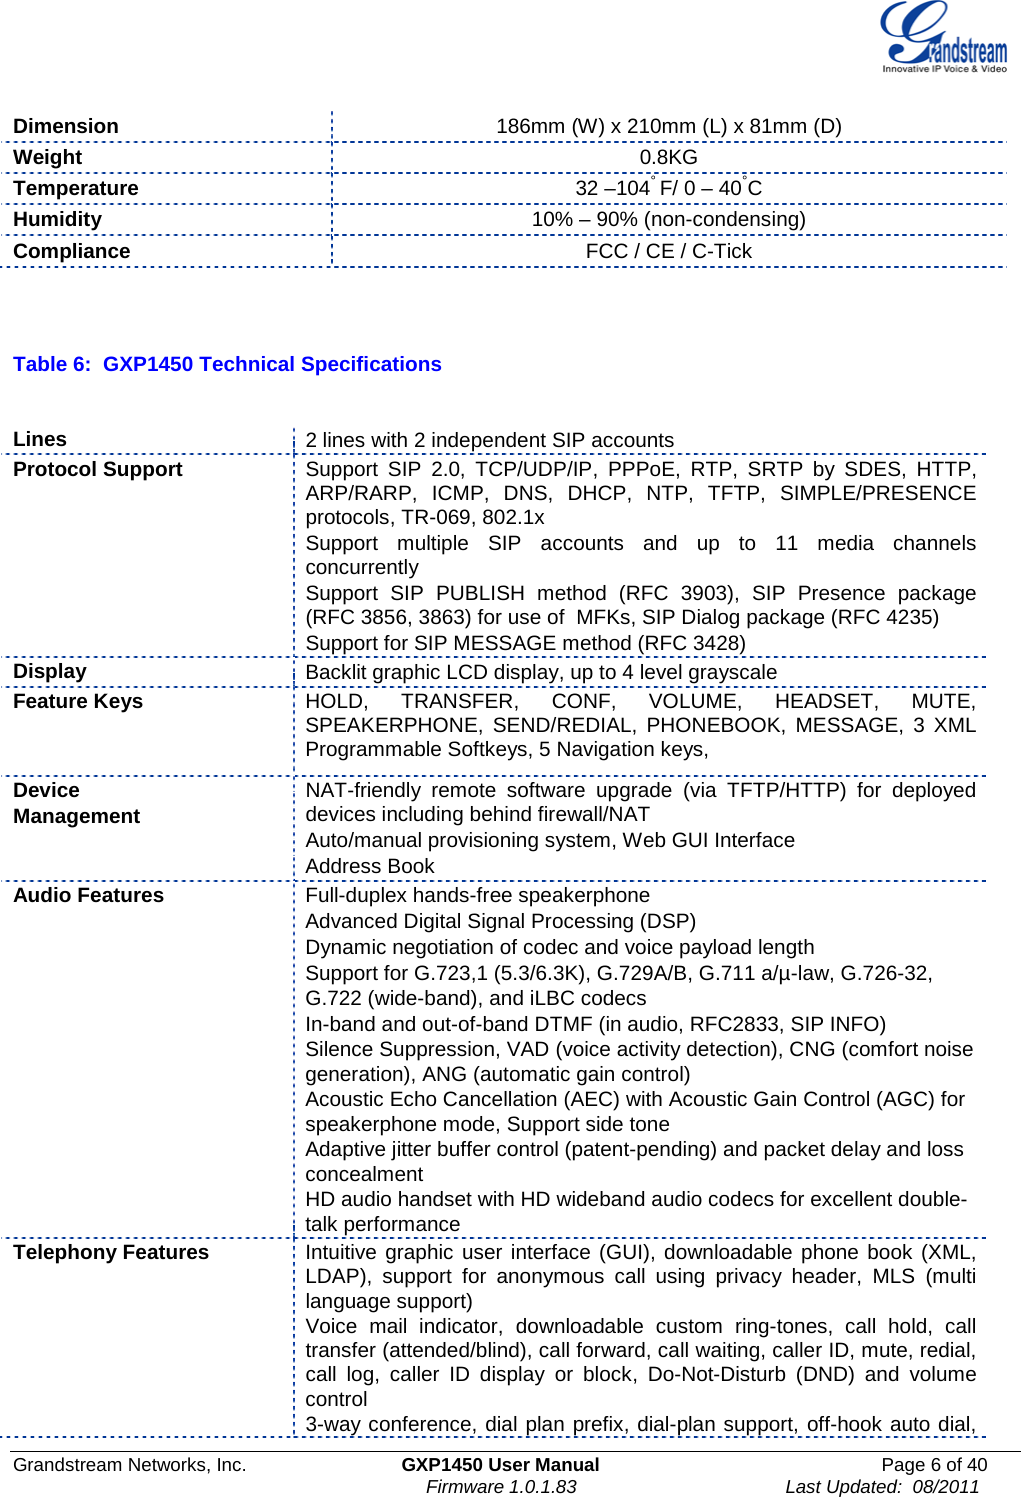  Grandstream Networks, Inc. GXP1450 User Manual Page 6 of 40                                                                          Firmware 1.0.1.83                                        Last Updated:  08/2011  Dimension 186mm (W) x 210mm (L) x 81mm (D) Weight 0.8KG Temperature 32 –104° F/ 0 – 40°C Humidity 10% – 90% (non-condensing) Compliance FCC / CE / C-Tick   Table 6:  GXP1450 Technical Specifications  Lines  2 lines with 2 independent SIP accounts Protocol Support Support SIP 2.0, TCP/UDP/IP, PPPoE, RTP, SRTP by SDES, HTTP, ARP/RARP, ICMP, DNS, DHCP, NTP, TFTP, SIMPLE/PRESENCE protocols, TR-069, 802.1x Support multiple SIP accounts and up to 11 media channels concurrently Support SIP PUBLISH method (RFC 3903), SIP Presence package (RFC 3856, 3863) for use of  MFKs, SIP Dialog package (RFC 4235) Support for SIP MESSAGE method (RFC 3428) Display  Backlit graphic LCD display, up to 4 level grayscale Feature Keys  HOLD,  TRANSFER, CONF, VOLUME, HEADSET, MUTE, SPEAKERPHONE, SEND/REDIAL, PHONEBOOK, MESSAGE, 3 XML Programmable Softkeys, 5 Navigation keys, Device  Management  NAT-friendly remote software upgrade (via TFTP/HTTP) for deployed devices including behind firewall/NAT Auto/manual provisioning system, Web GUI Interface Address Book Audio Features  Full-duplex hands-free speakerphone Advanced Digital Signal Processing (DSP) Dynamic negotiation of codec and voice payload length Support for G.723,1 (5.3/6.3K), G.729A/B, G.711 a/µ-law, G.726-32, G.722 (wide-band), and iLBC codecs In-band and out-of-band DTMF (in audio, RFC2833, SIP INFO) Silence Suppression, VAD (voice activity detection), CNG (comfort noise generation), ANG (automatic gain control) Acoustic Echo Cancellation (AEC) with Acoustic Gain Control (AGC) for speakerphone mode, Support side tone Adaptive jitter buffer control (patent-pending) and packet delay and loss concealment HD audio handset with HD wideband audio codecs for excellent double-talk performance Telephony Features Intuitive graphic user interface (GUI), downloadable phone book (XML, LDAP), support for anonymous call using privacy header, MLS (multi language support) Voice mail indicator, downloadable custom ring-tones, call hold, call transfer (attended/blind), call forward, call waiting, caller ID, mute, redial, call log, caller ID display or block, Do-Not-Disturb (DND) and volume control 3-way conference, dial plan prefix, dial-plan support, off-hook auto dial, 